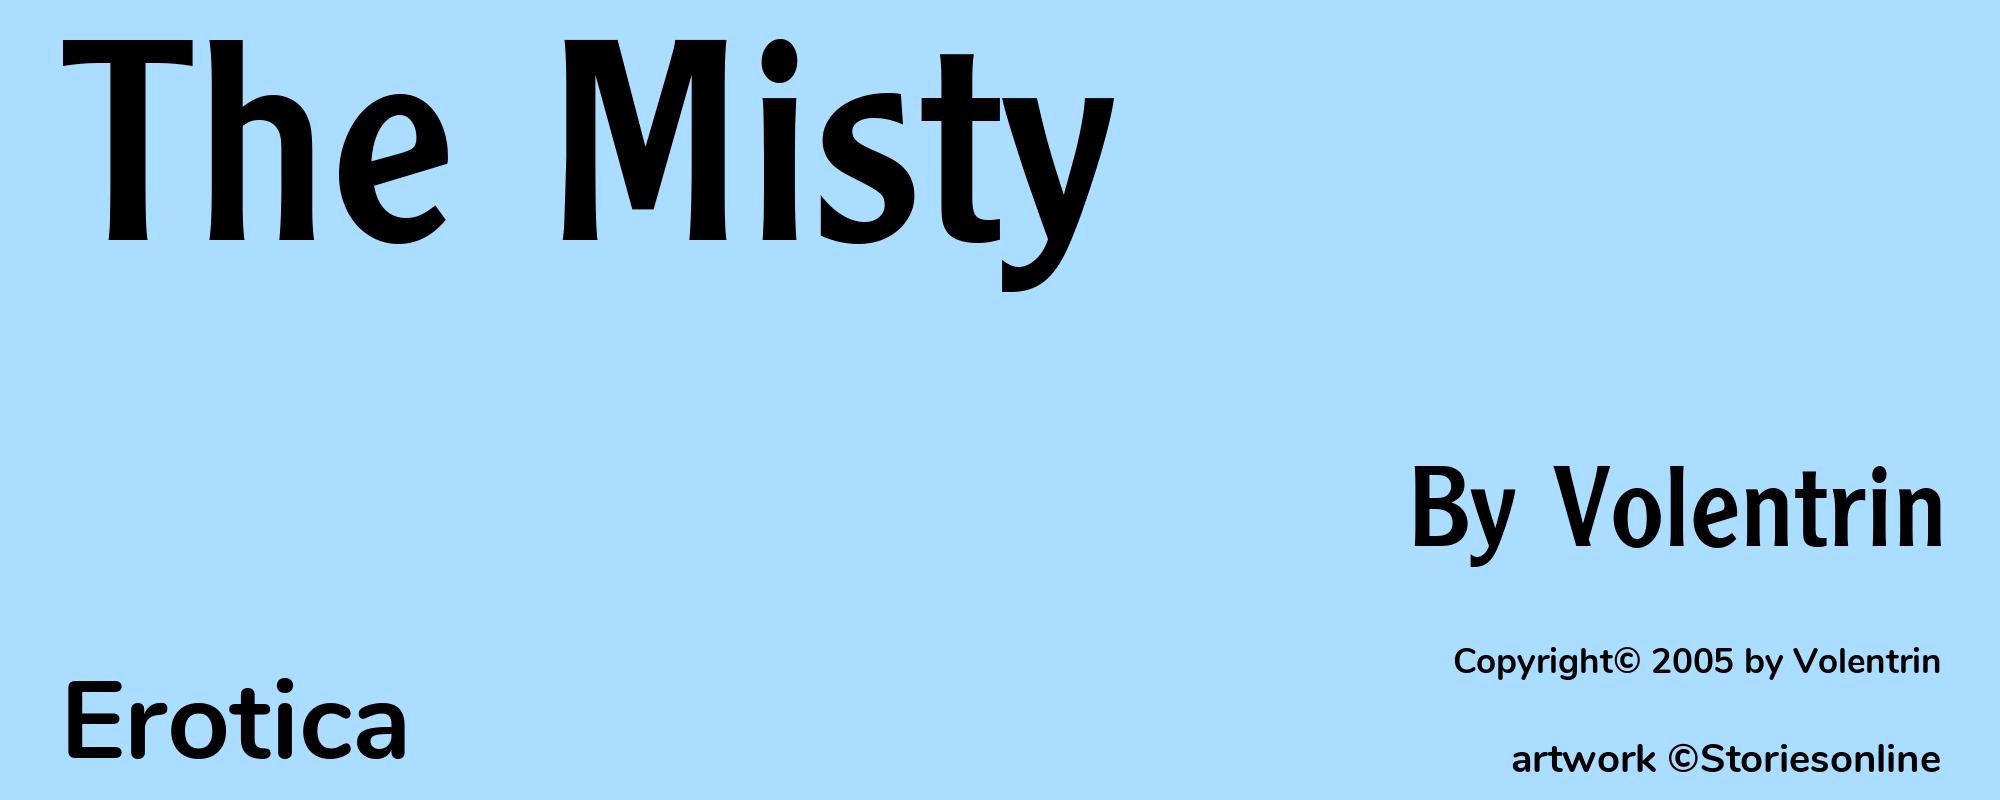 The Misty - Cover